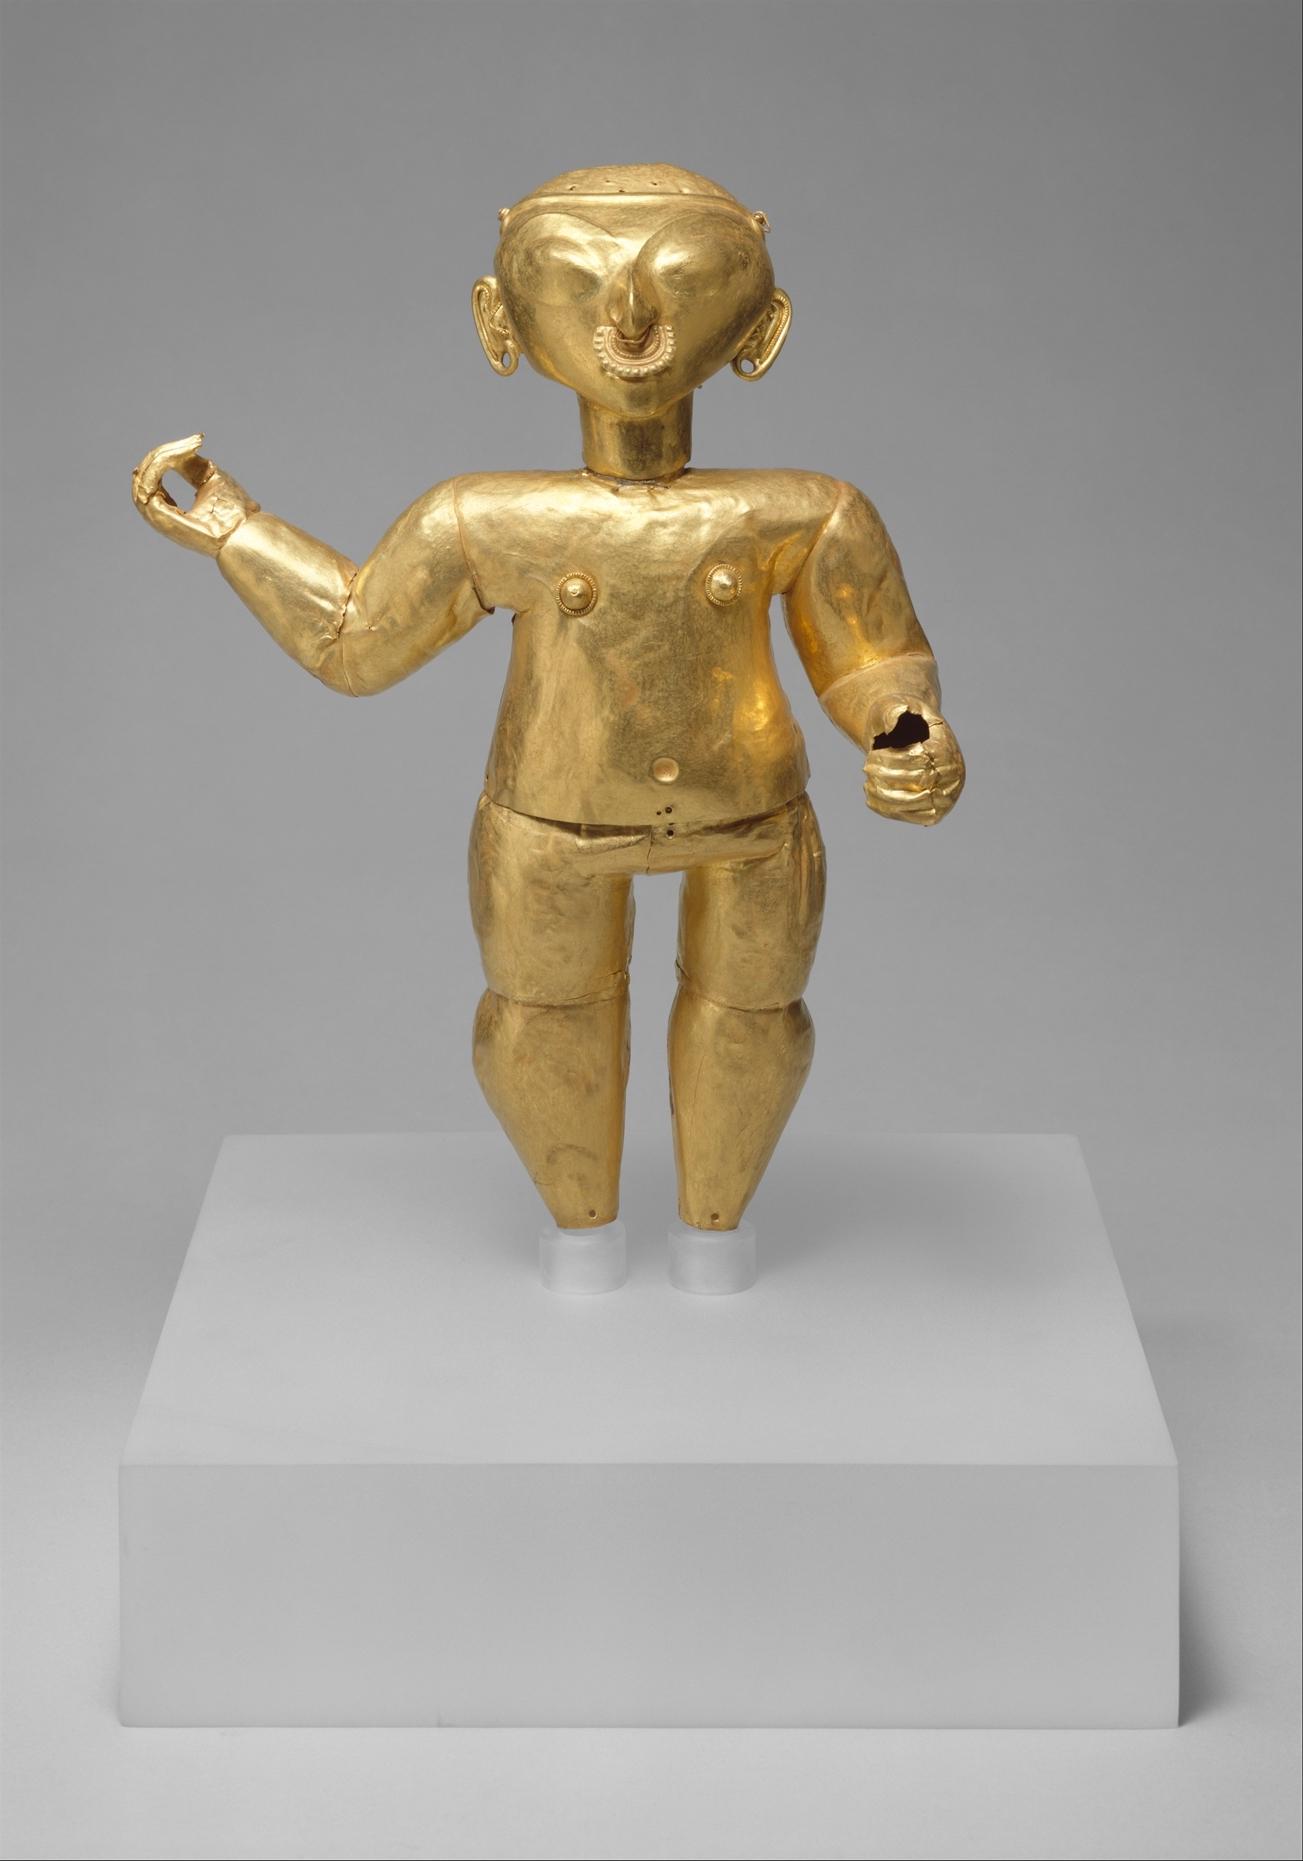 The Tolita-Tumaco culture, front view of Standing Figure, 100 B.C.–A.D. 100, Gold.